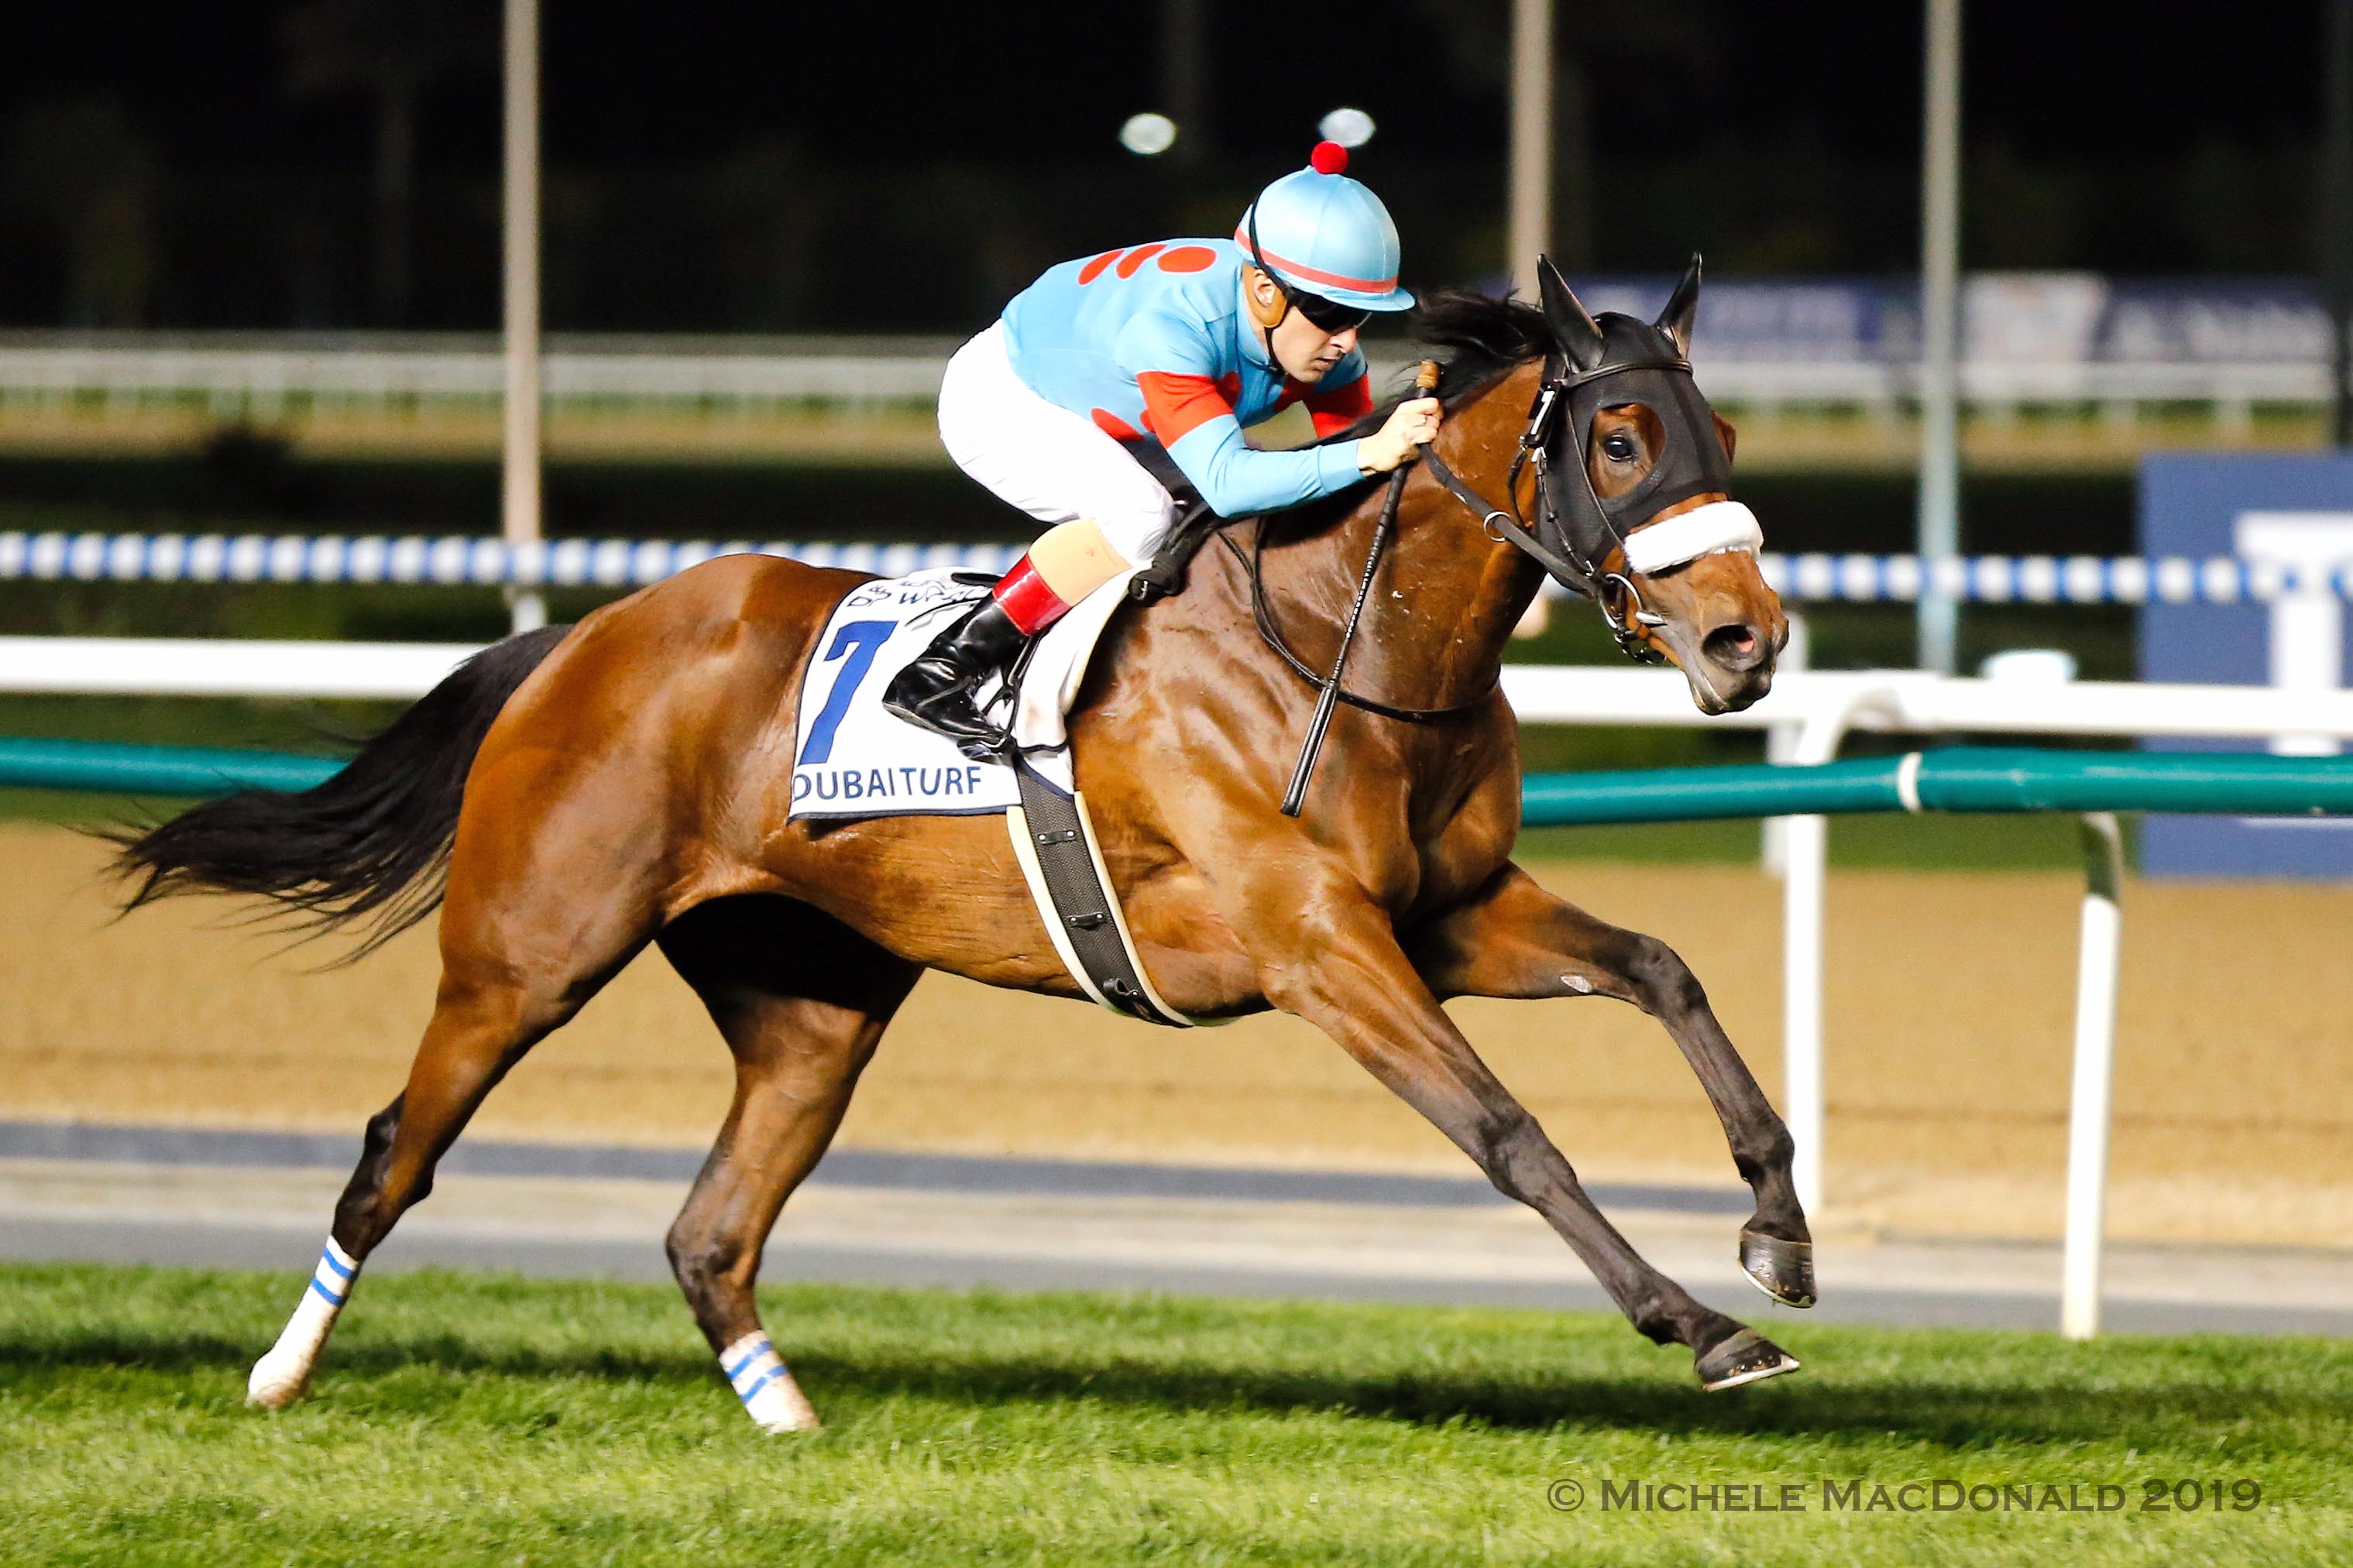 In a class of her own: Almond Eye (Christophe Lemaire) has the Dubai Turf firmly under control. Photo: Michele MacDonald